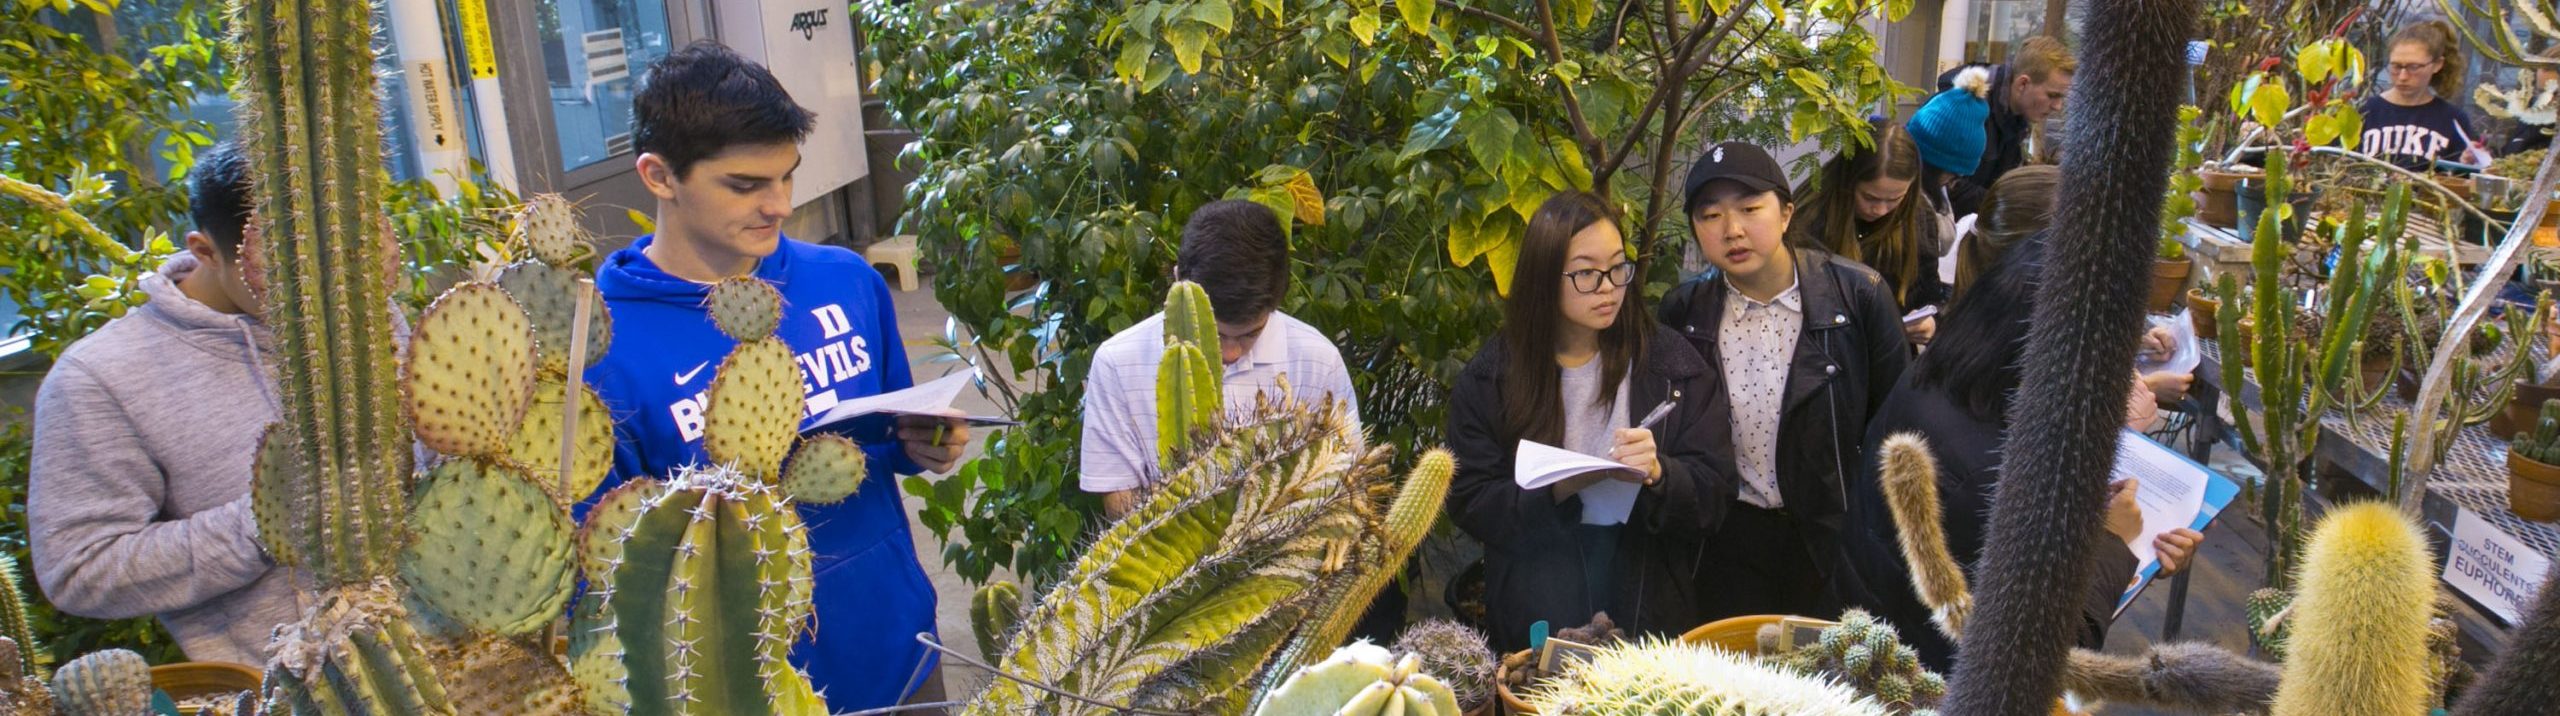 Students in a greenhouse surrounded by plants and cacti.